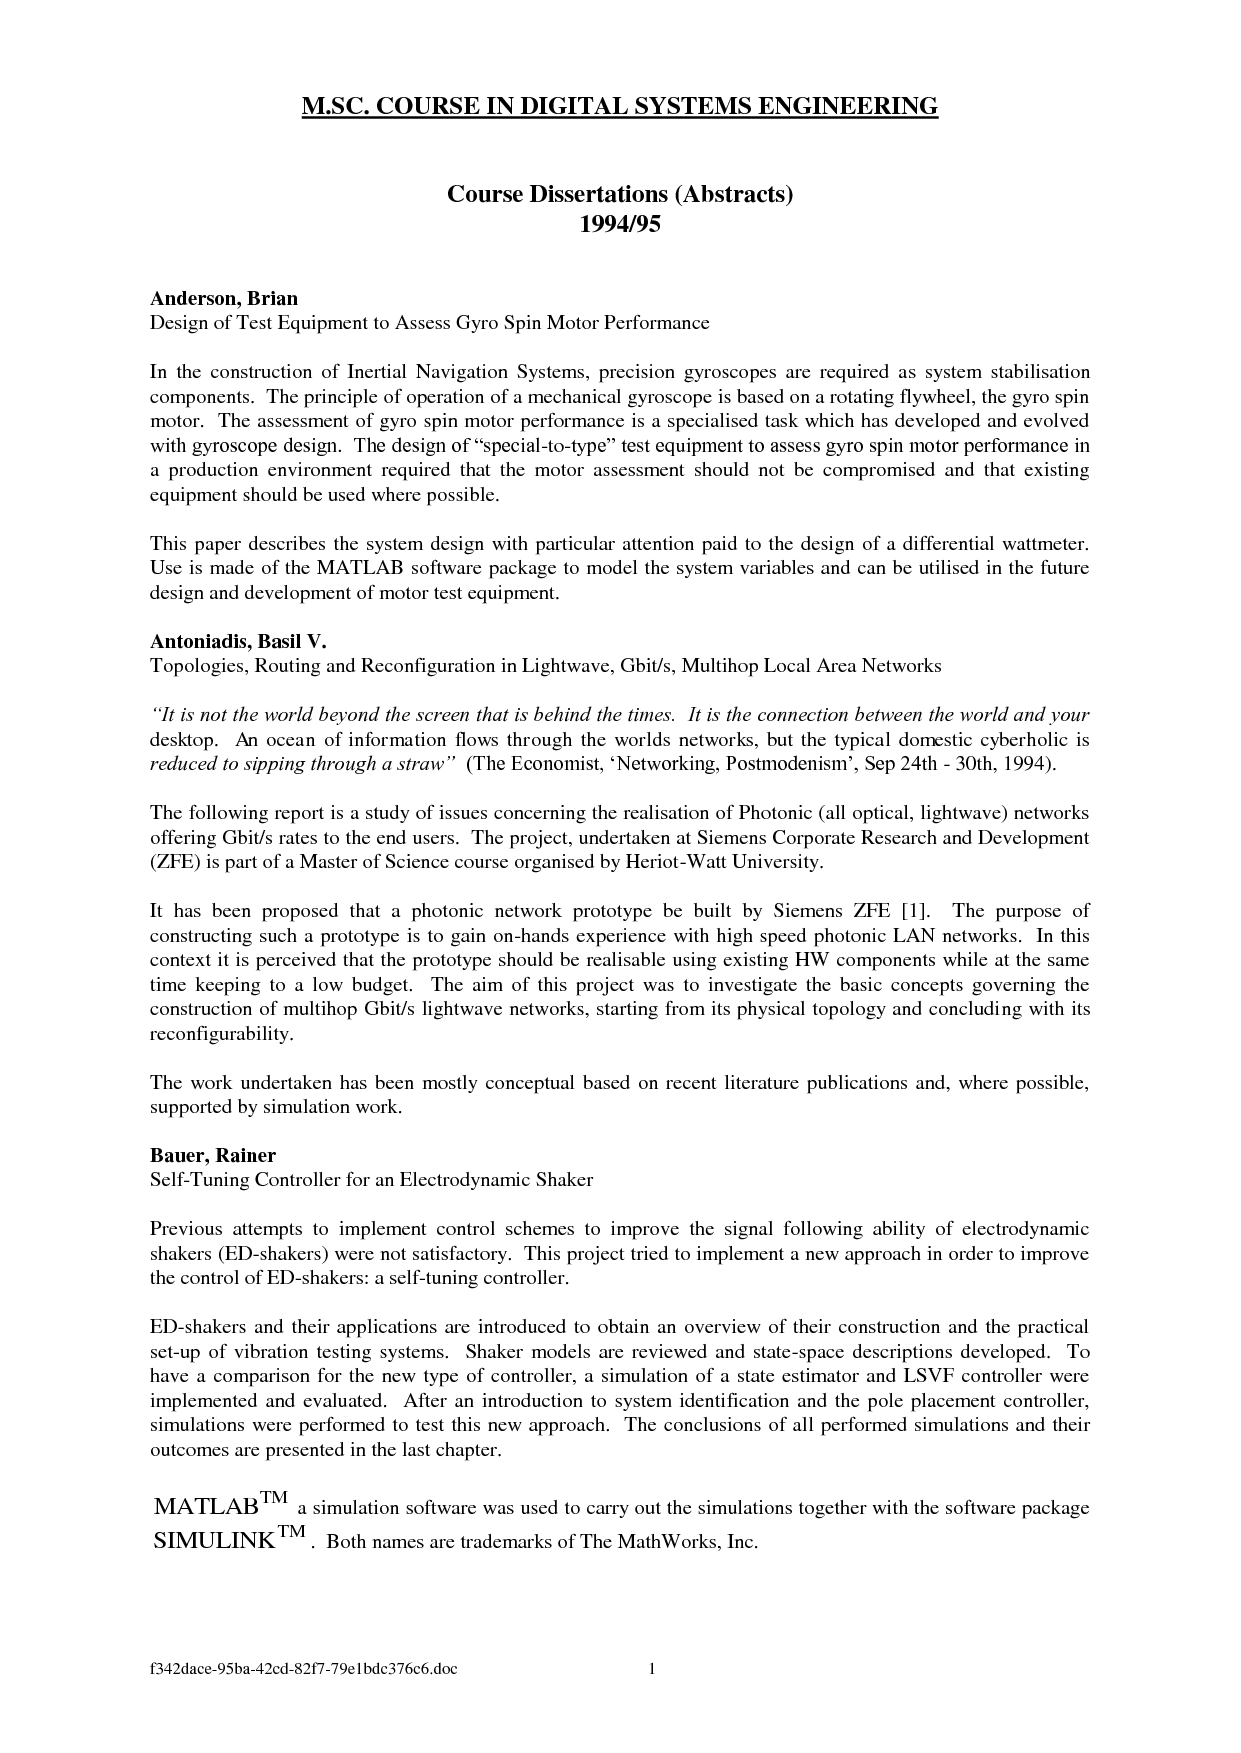 Phd thesis abstracts